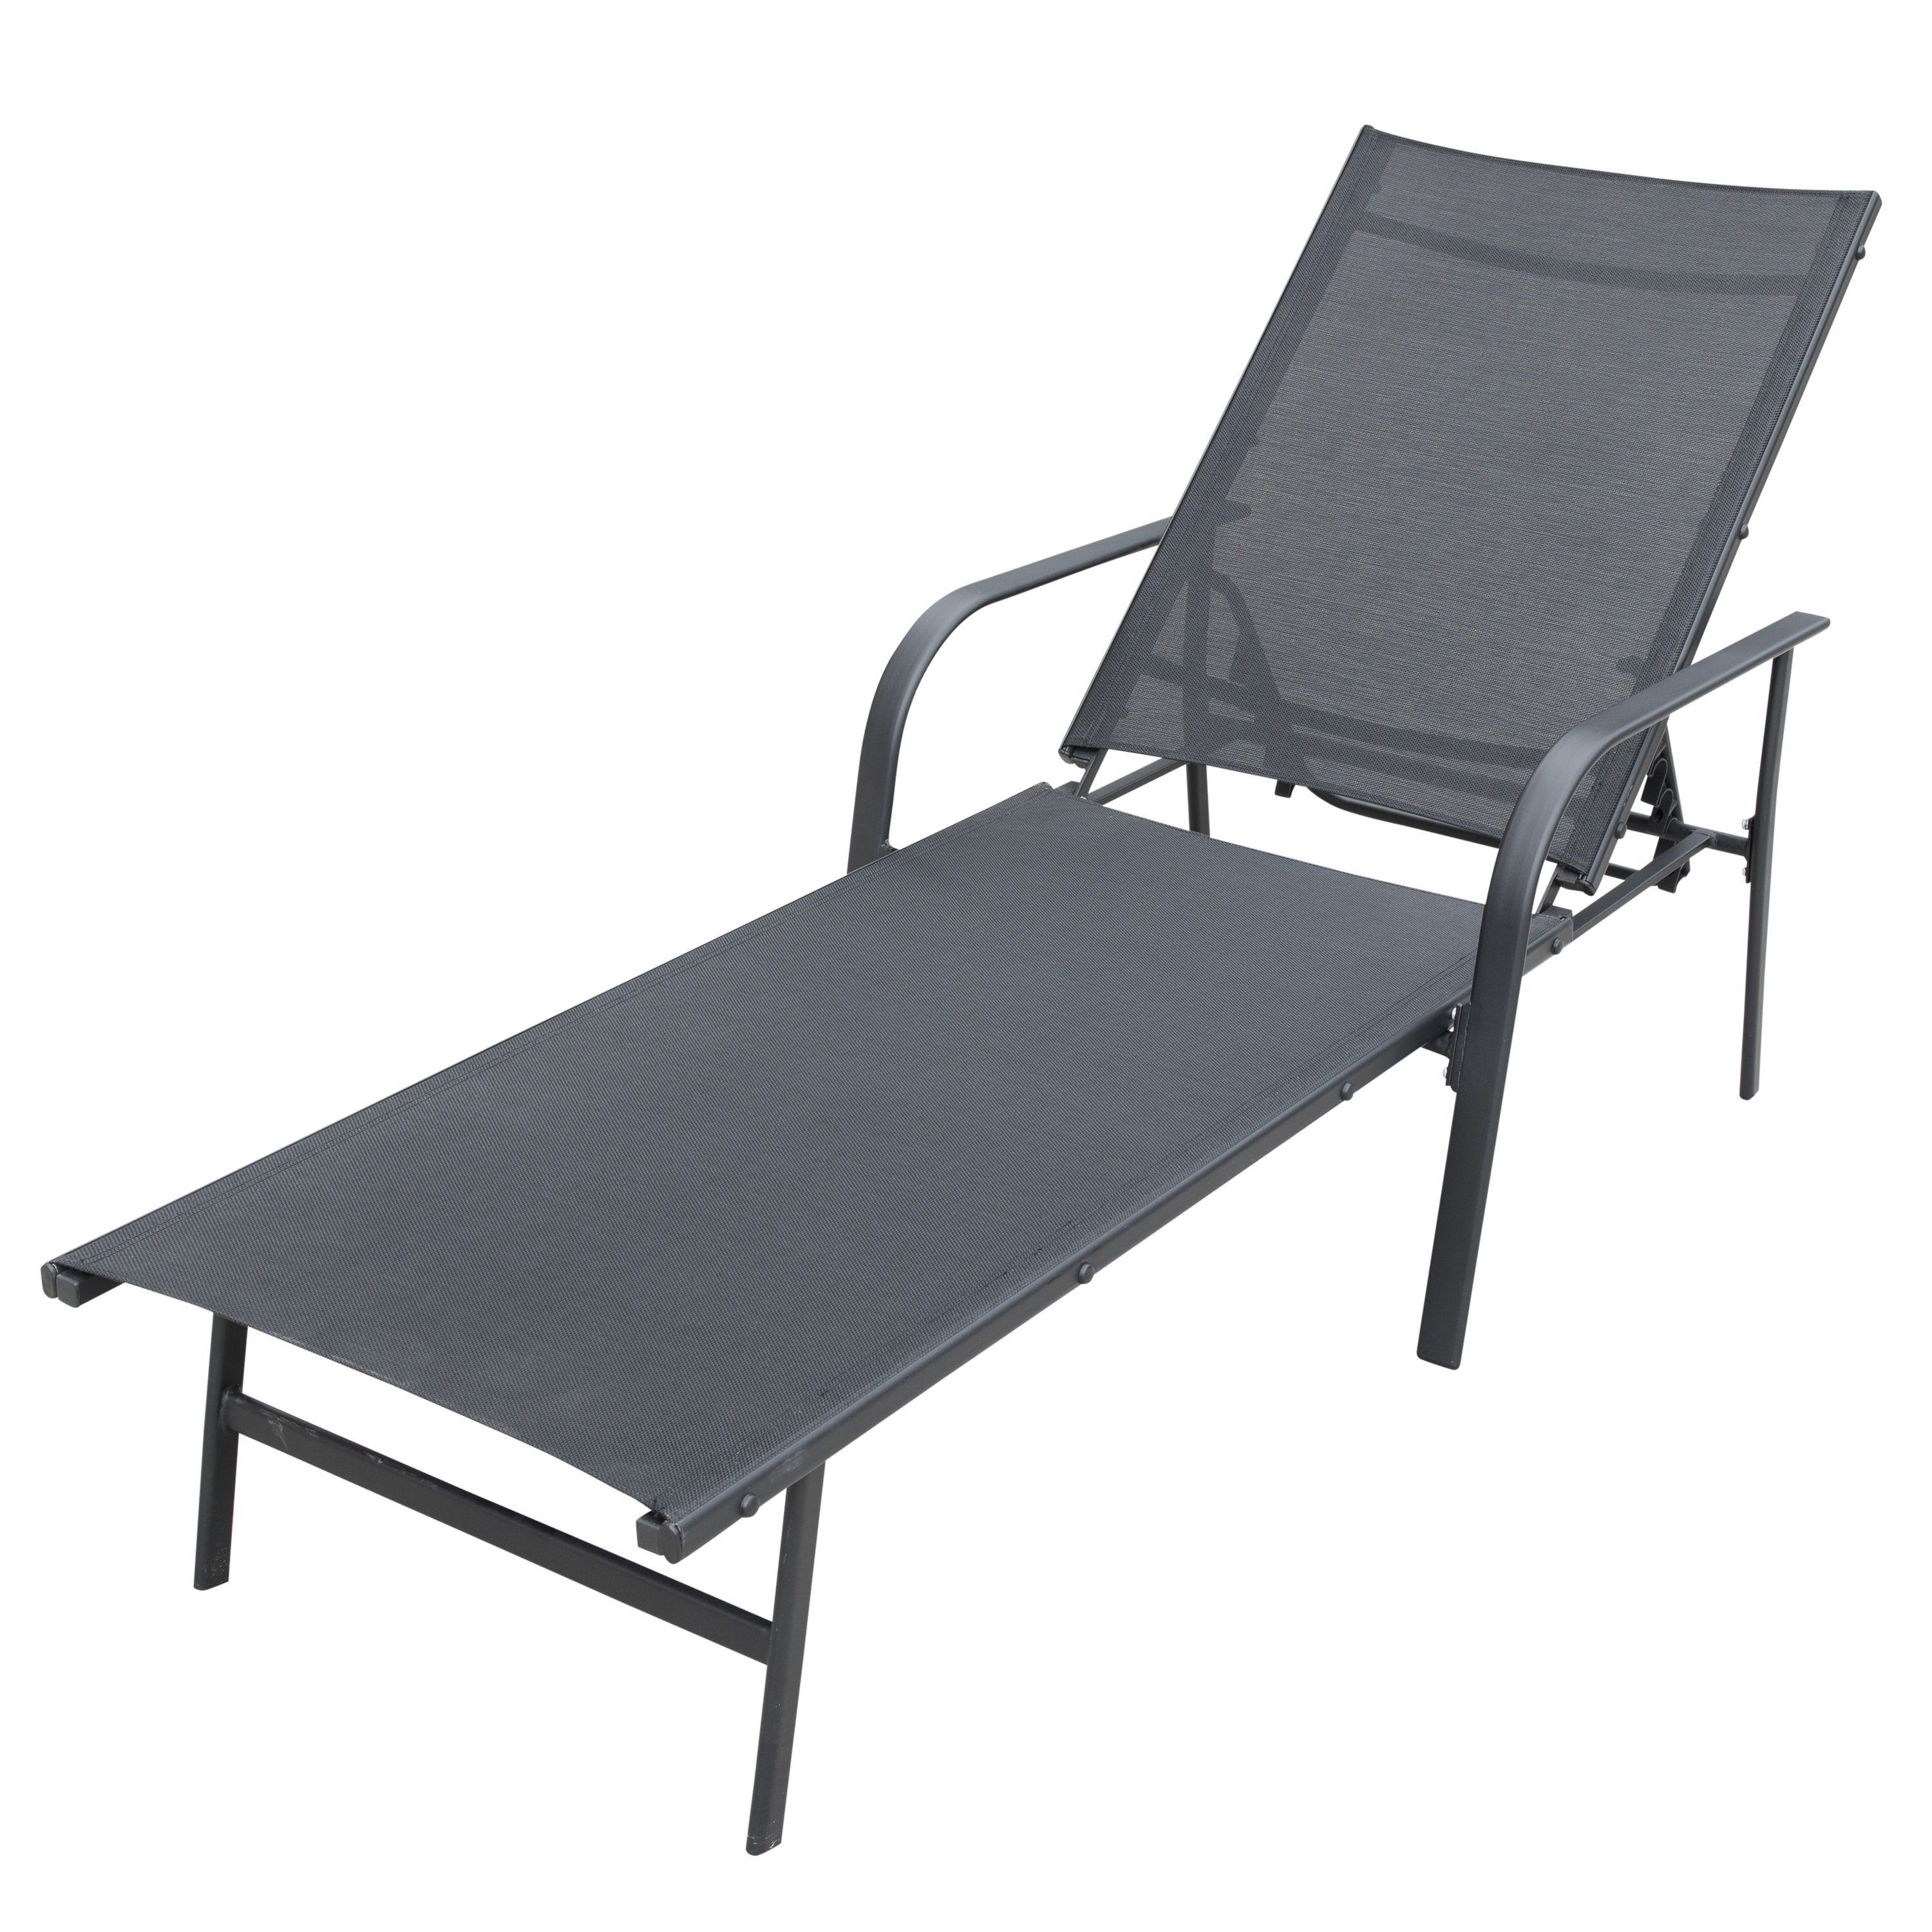 Corvus Antonio Outdoor Black Sling Fabric Adjustable Chaise In 2019 Antonio Sling Fabric Adjustable Outdoor Chaise Lounges (View 12 of 25)